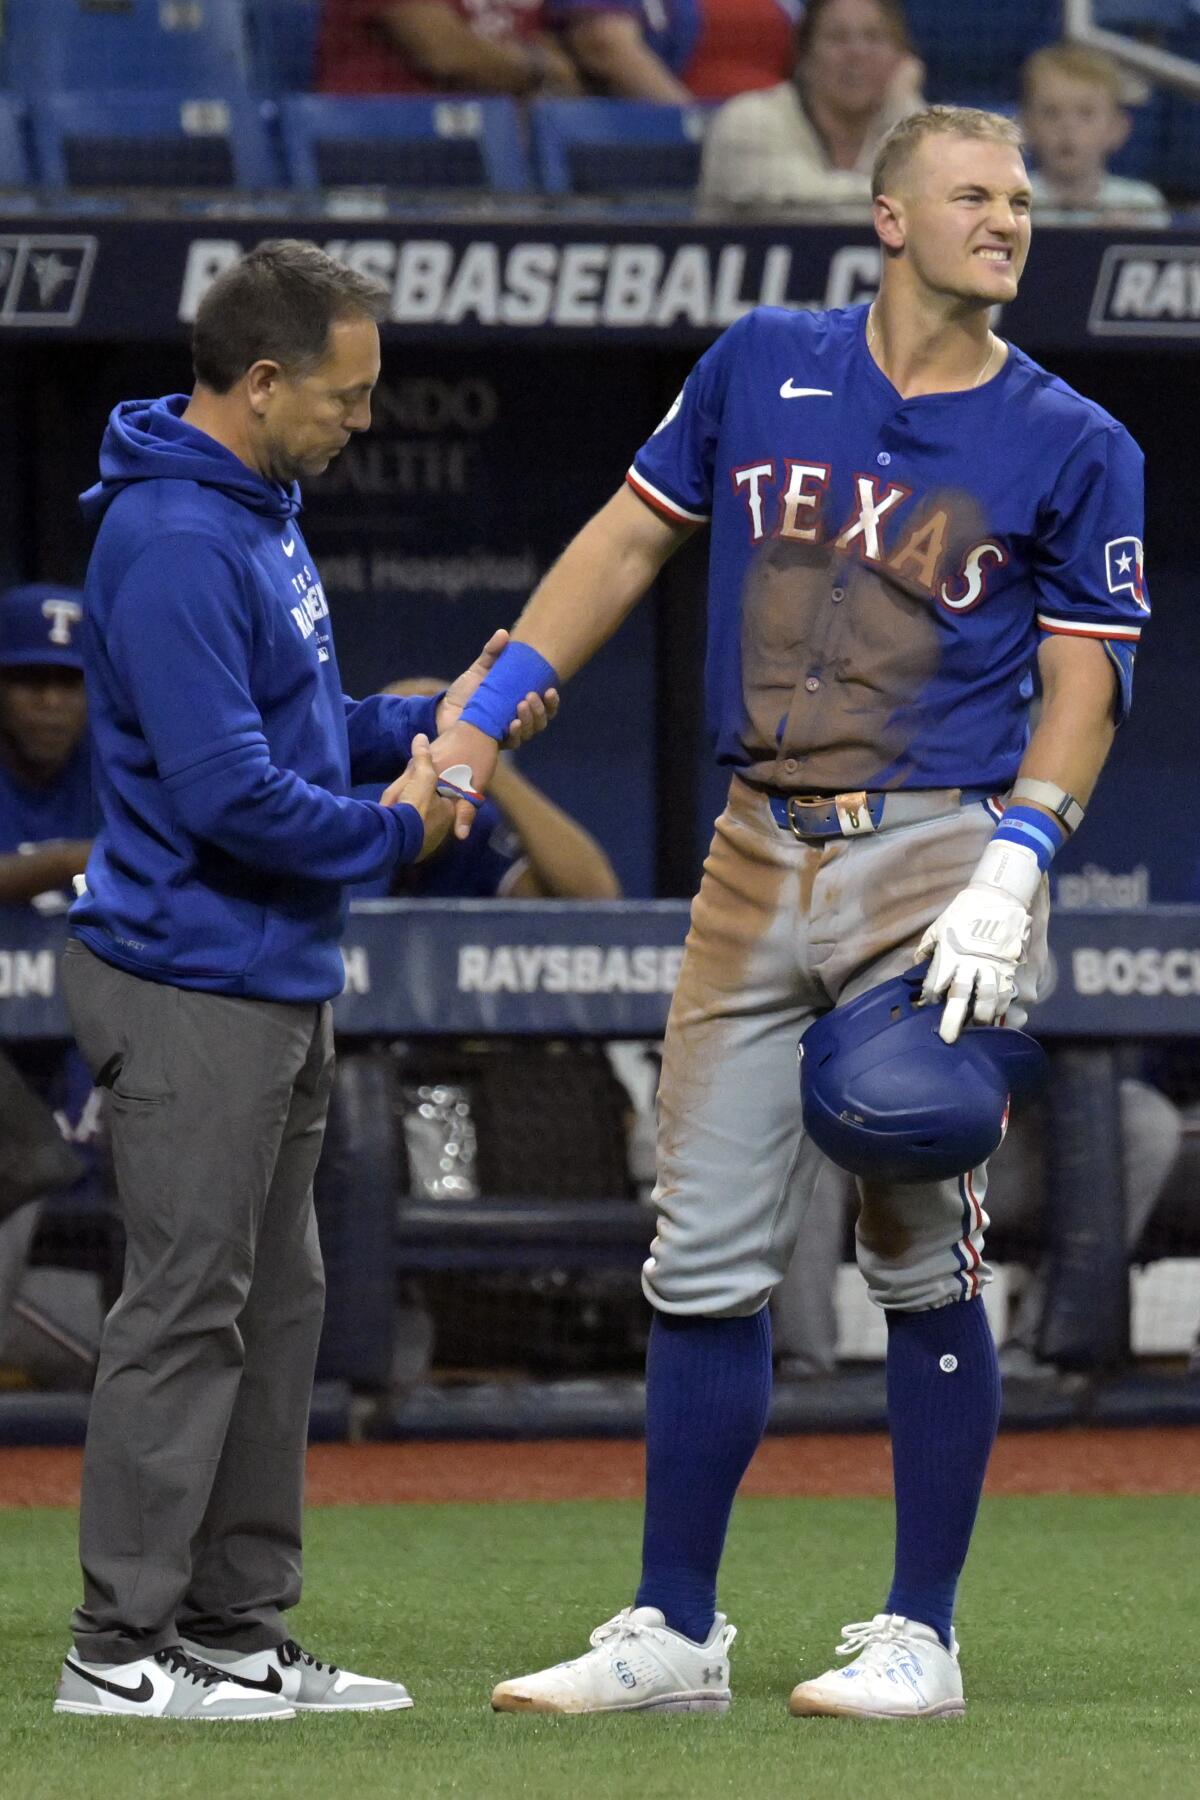 Rangers 3B Josh Jung to have surgery for broken right wrist - The San Diego Union-Tribune